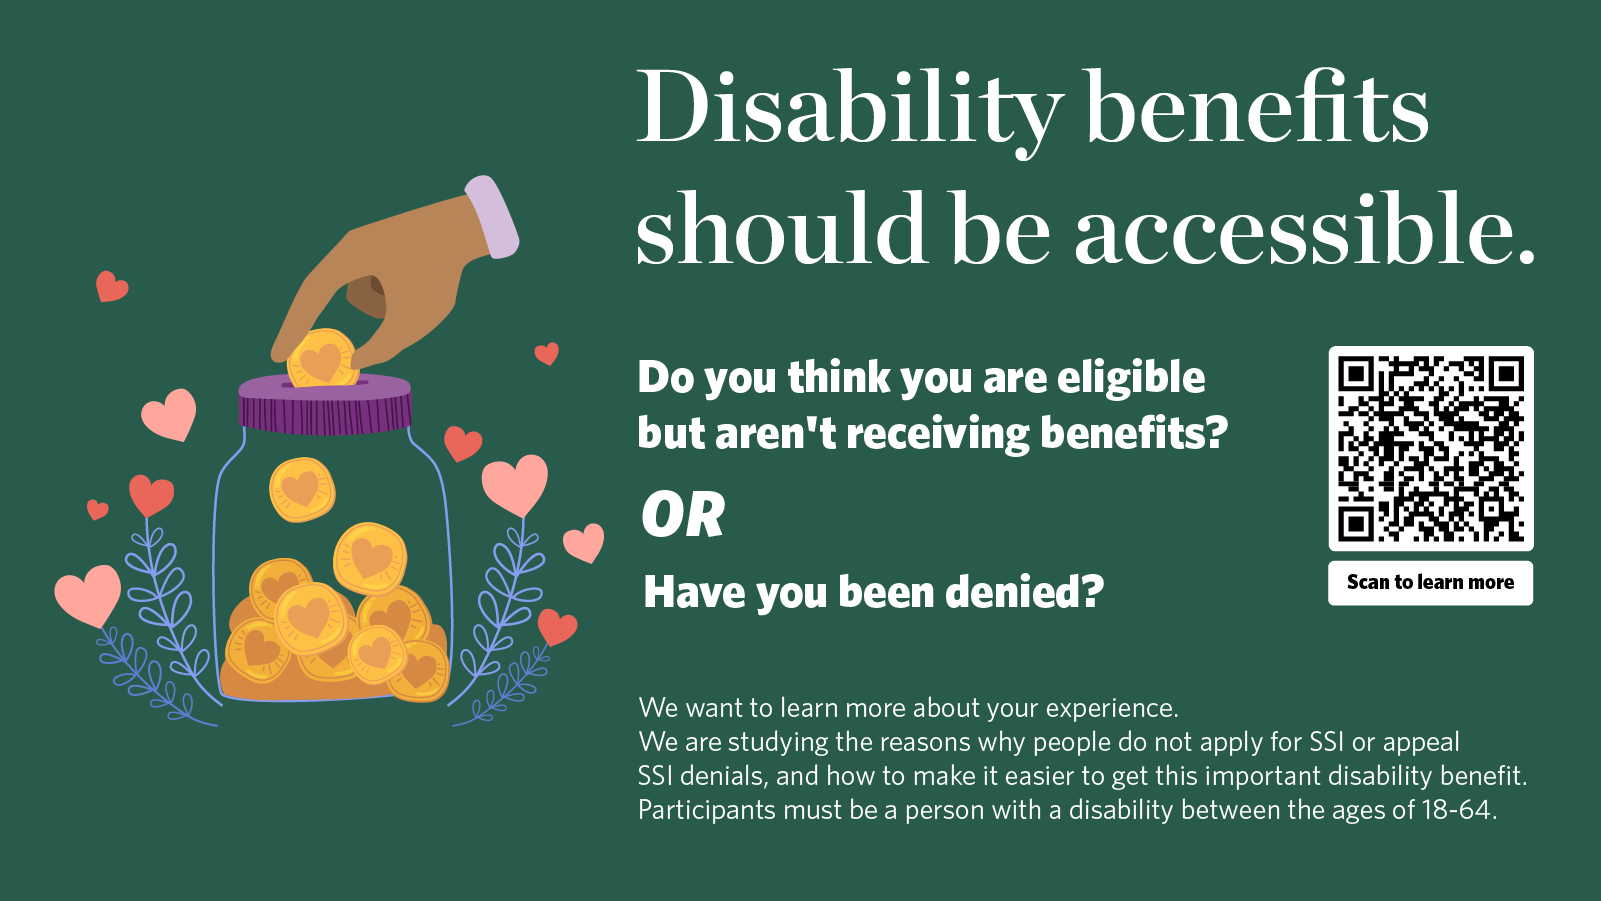 Challenges Accessing SSI for People with Disabilities